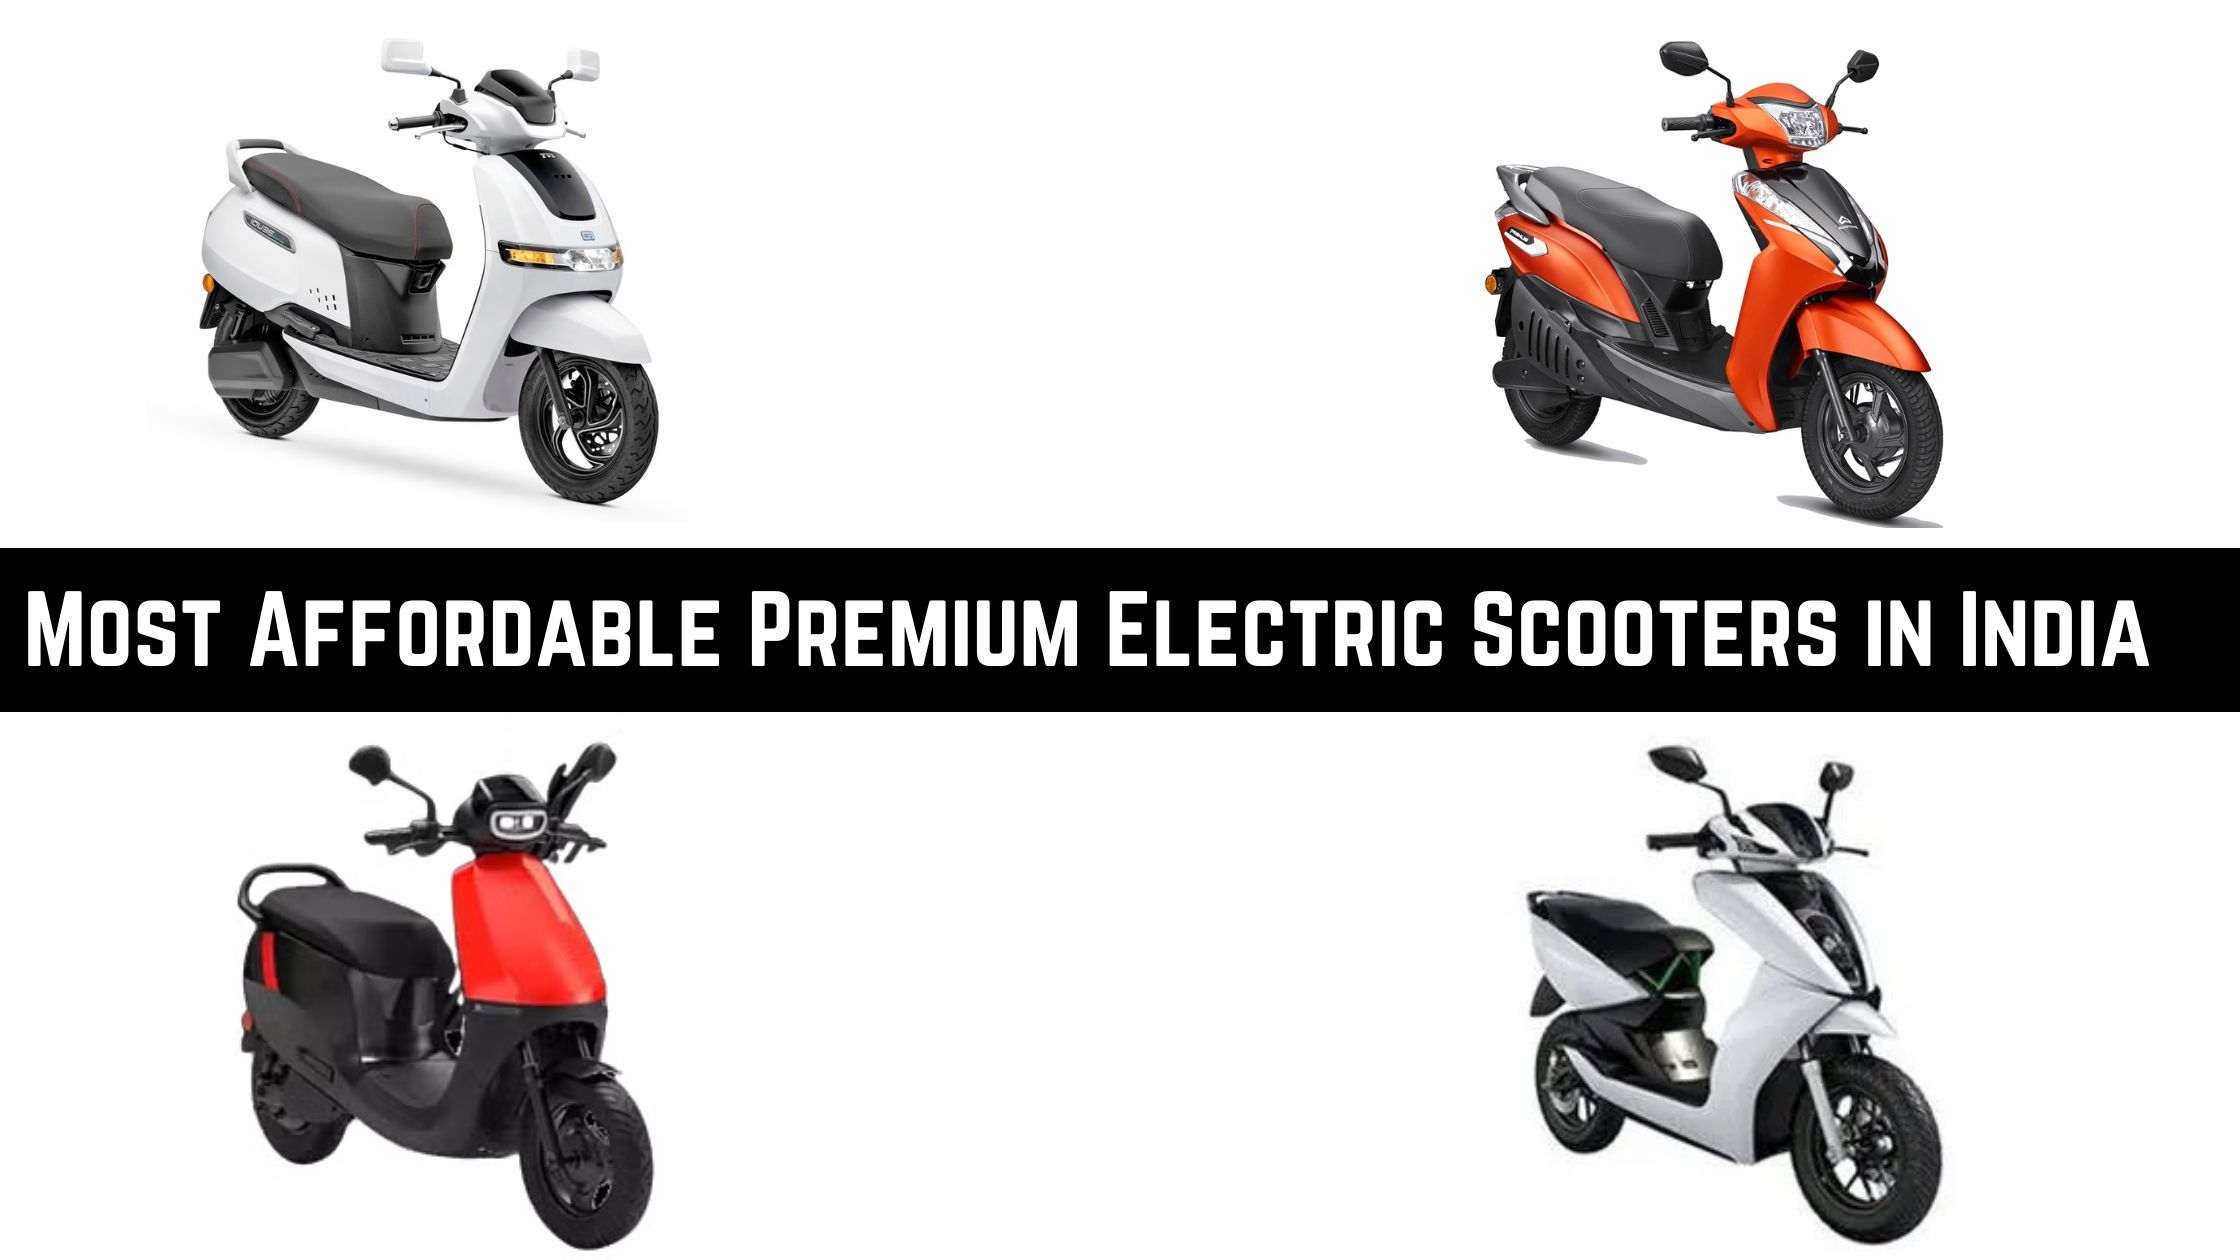 Top 5 Most Affordable Premium Electric Scooters in India